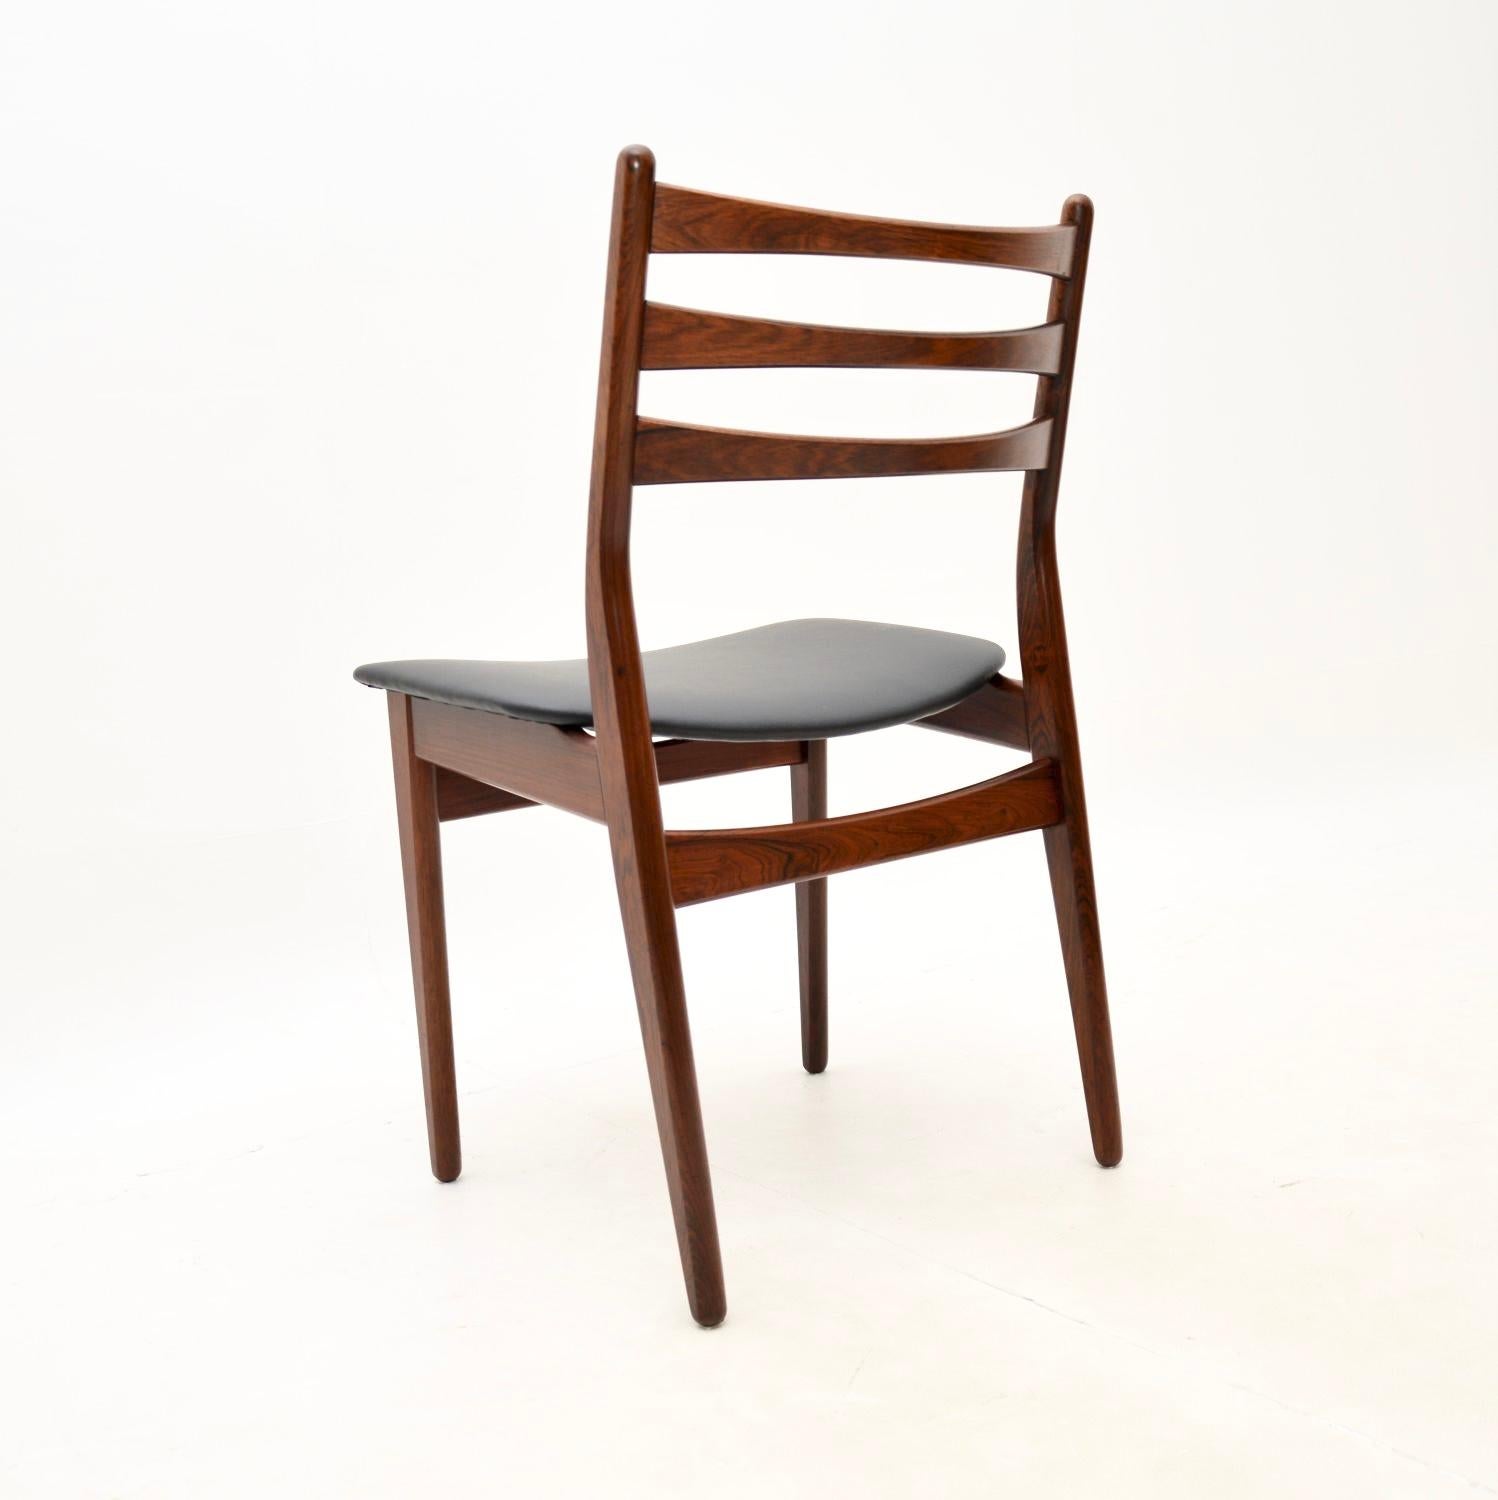 Mid-20th Century Danish Vintage Dining / Desk Chair For Sale